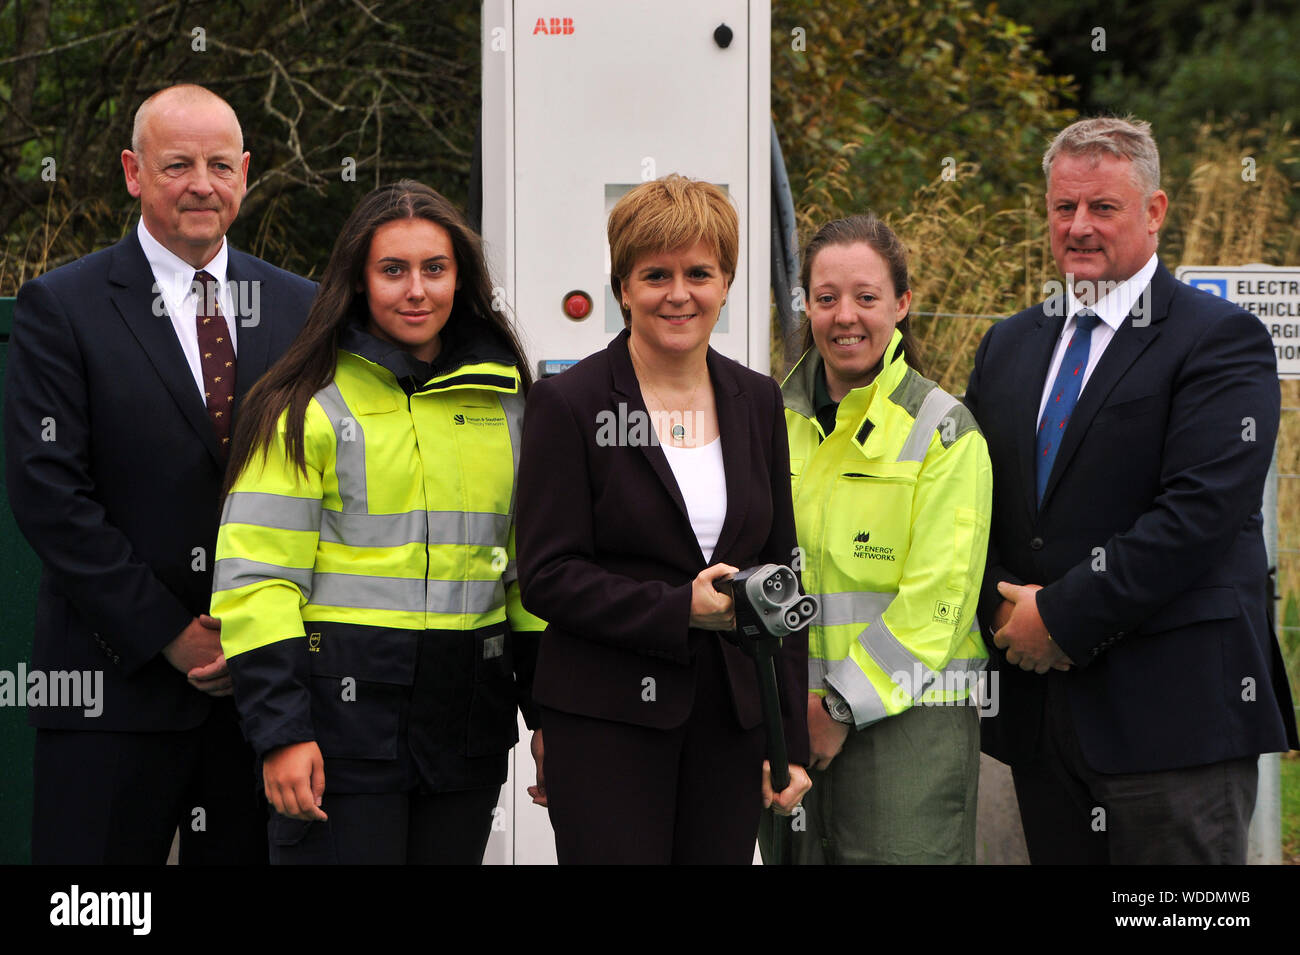 Scotland's First Minister Nicola Sturgeon holds an electric vehicle charging socket with SSE Networks Managing Director, Colin Nicol (left), SP Energy Networks (a unit of Scottish Power) CEO Frank Mitchell (right) and apprentices Darcie Lynch and Kirsten Gallagher during a visit to the University of Strathclyde's Power Networks Demonstration Centre in Cumbernauld, near Glasgow where she announced additional investment in the country's electric vehicle charging infrastructure. Stock Photo